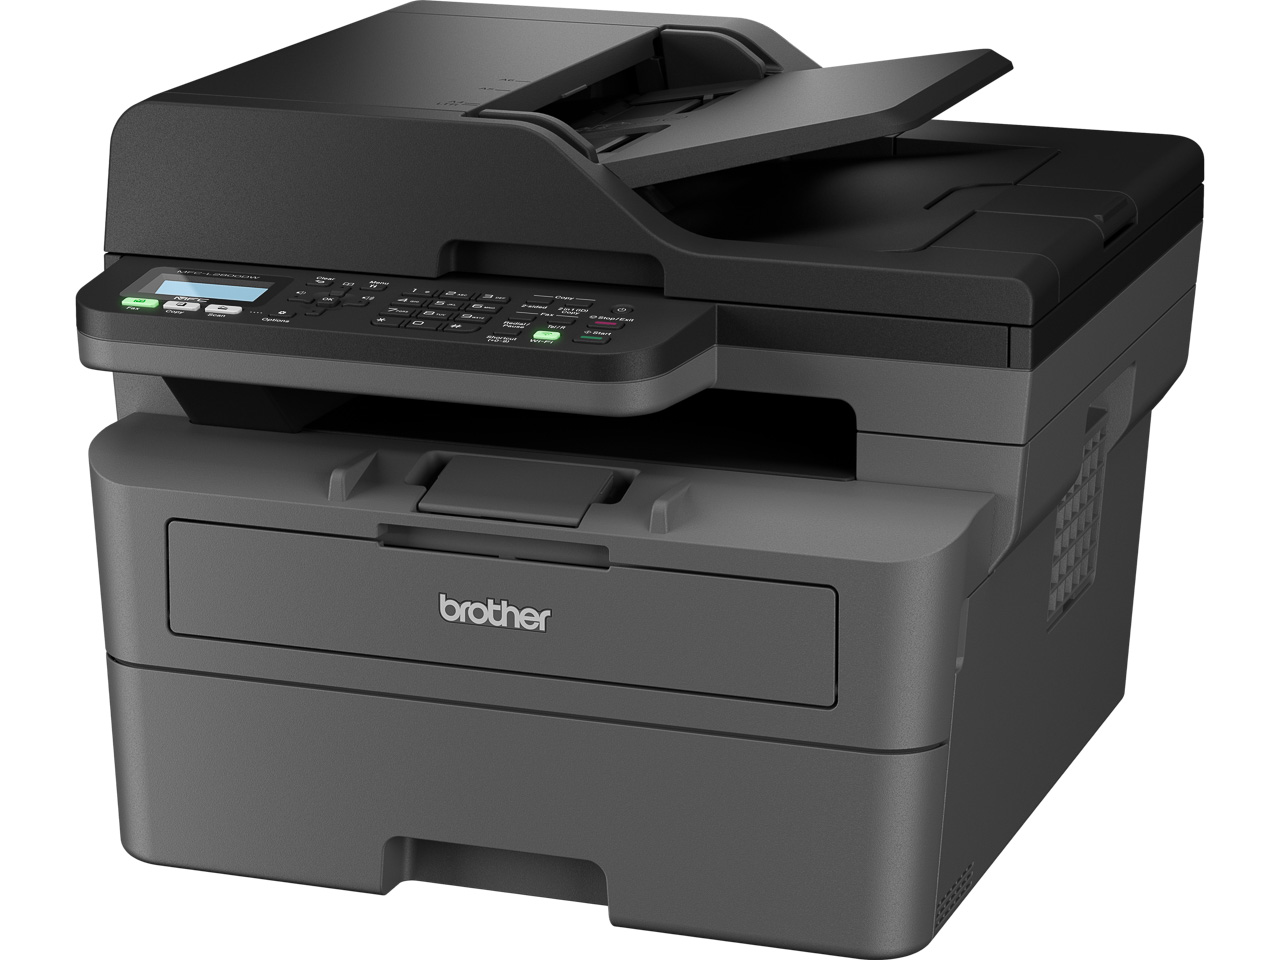 MFCL2800DWRE1 BROTHER MFCL2800DW 4in1 Laserdrucker mono A4 WLAN Duplex 1